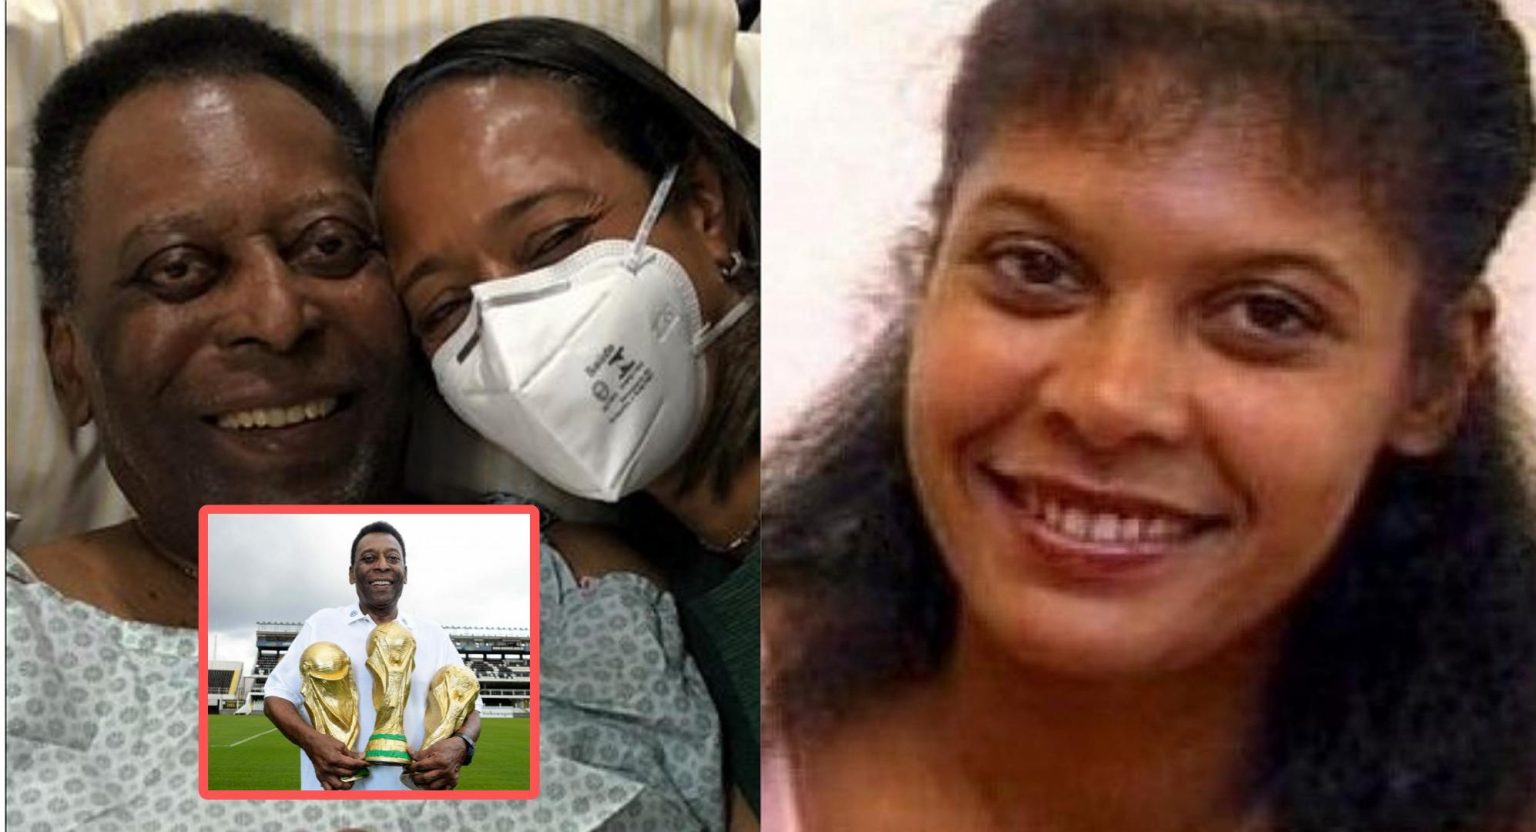 Football Icon Pele names his deceased secret daughter in his £13m will on his deathbed, despite denying she was ever his